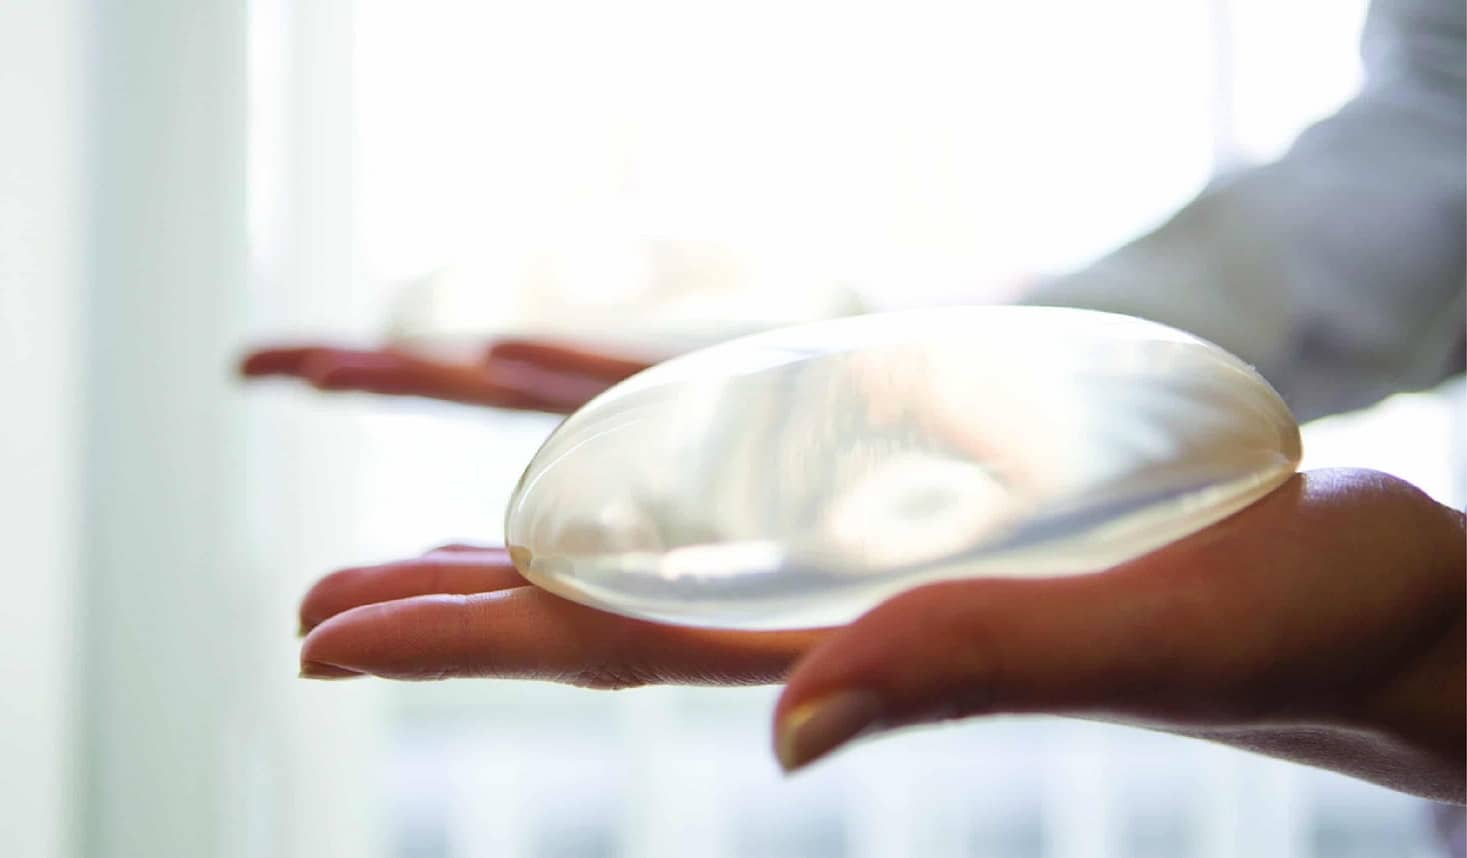 A person holding a breast implant, showcasing the surgical implant used in breast augmentation procedures.